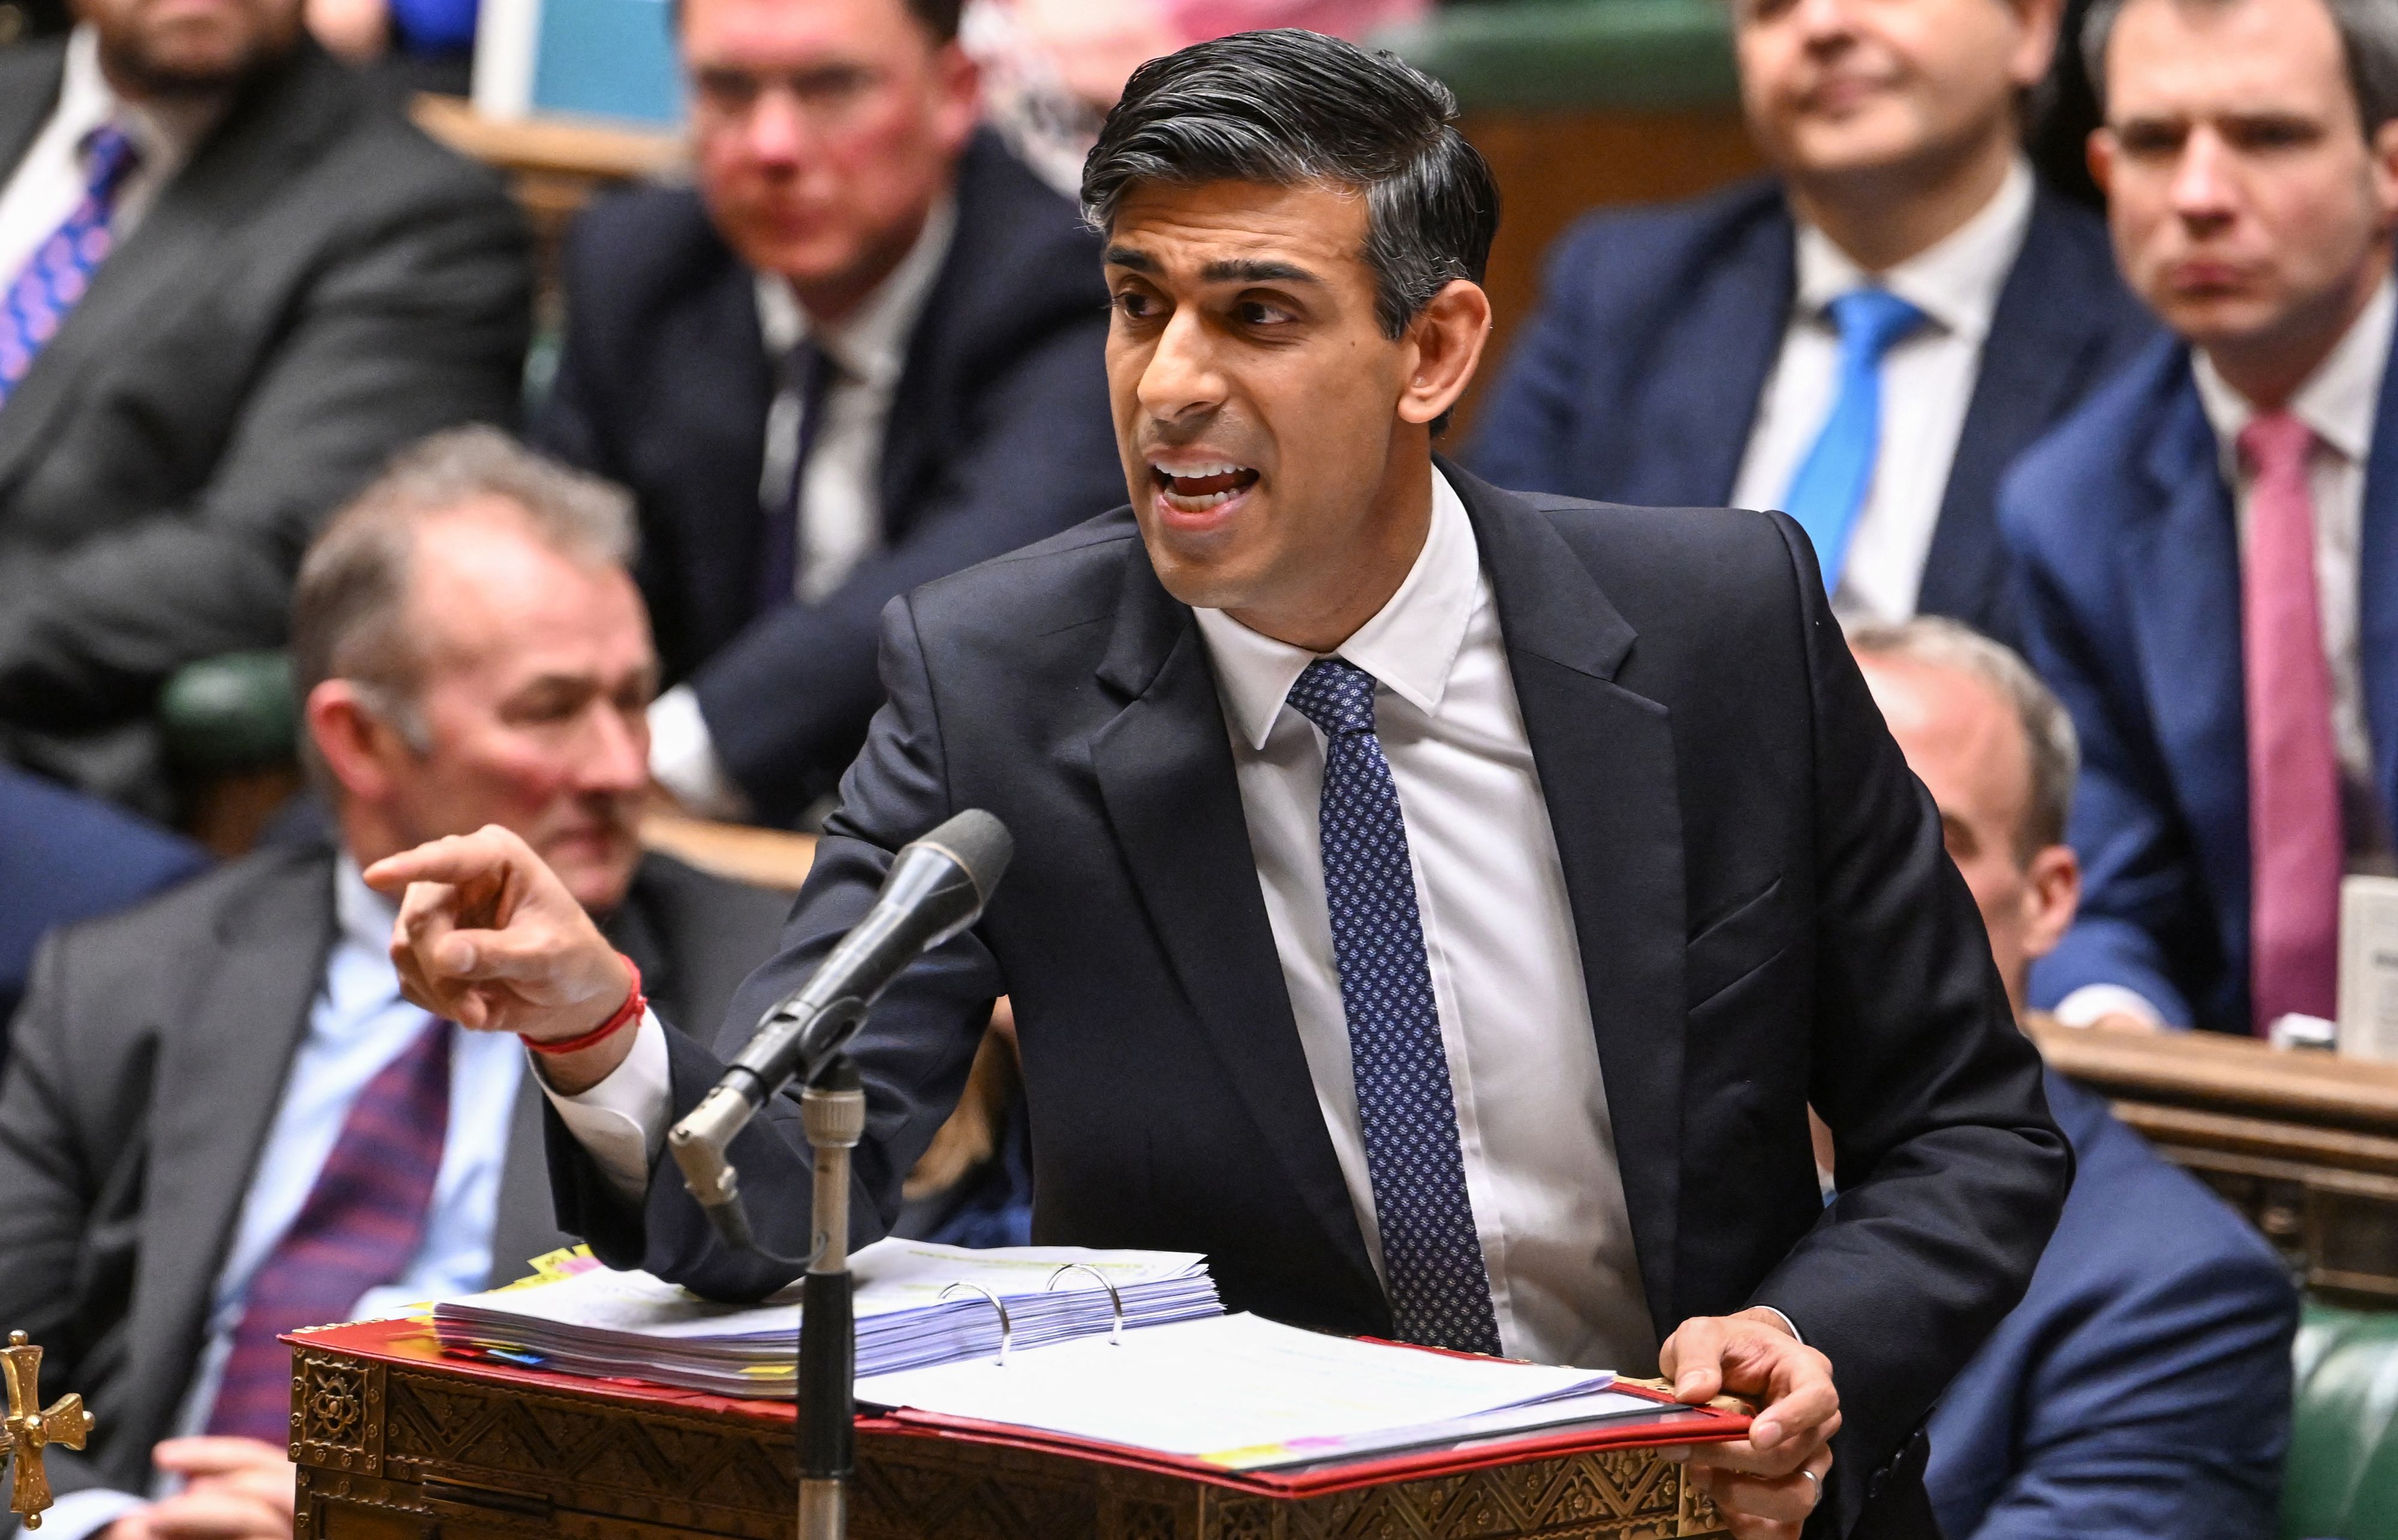 January, 2023: Rishi speaking at the Despatch box during Prime Minister's Questions in the House of Commons